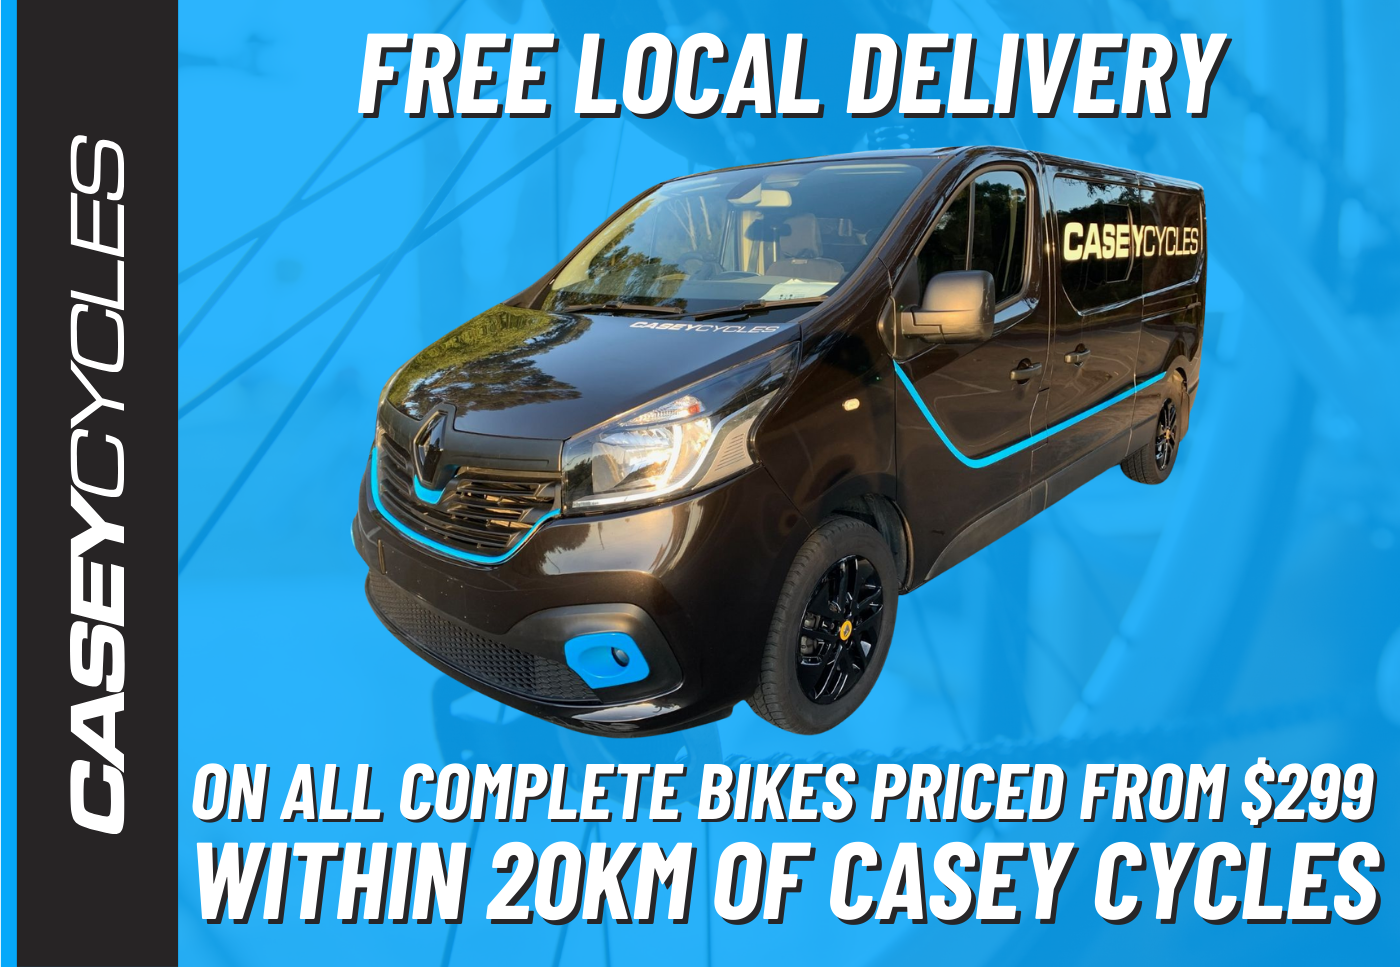 Buy any complete bike priced from $299 and receive free local delivery with 20km of Casey Cycles Cranbourne.